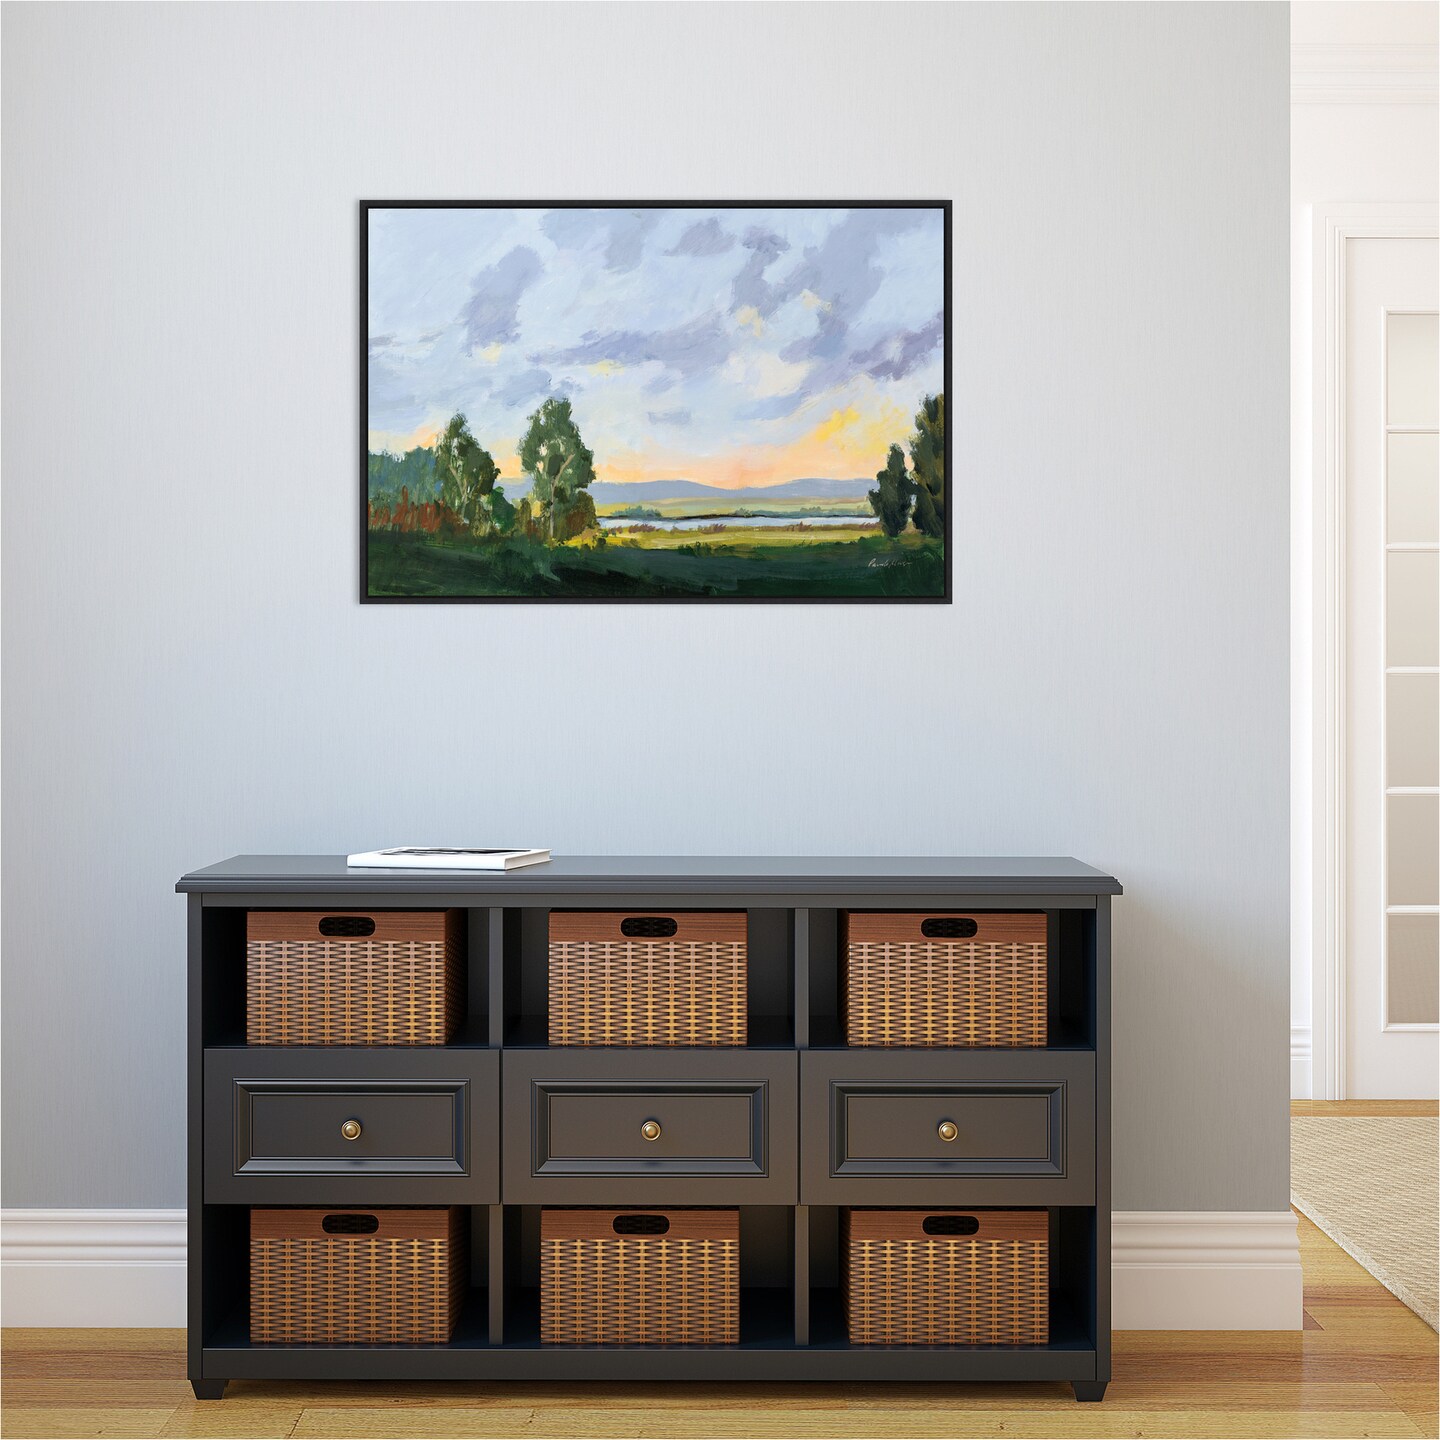 Evening Skies I by Pamela Munger 33-in. W x 23-in. H. Canvas Wall Art Print Framed in Black